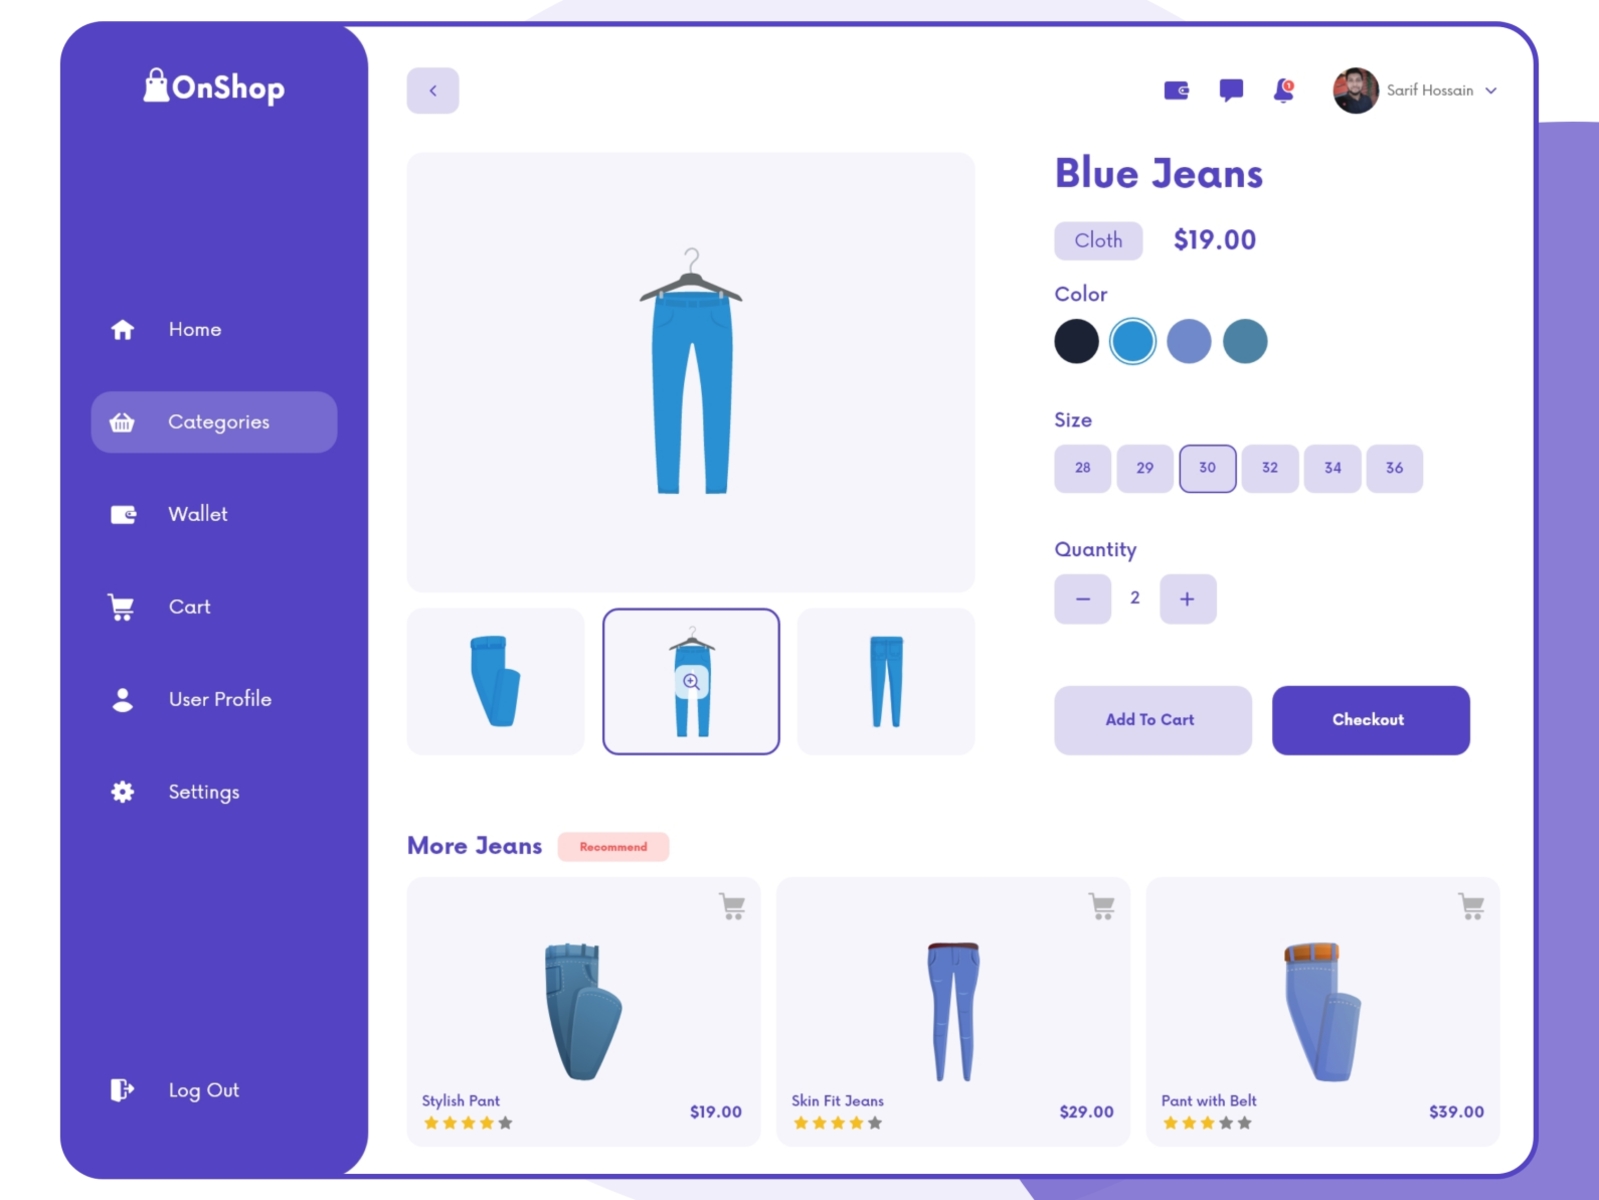 Product Page screen design idea #31: OnShop-Product Buy Page